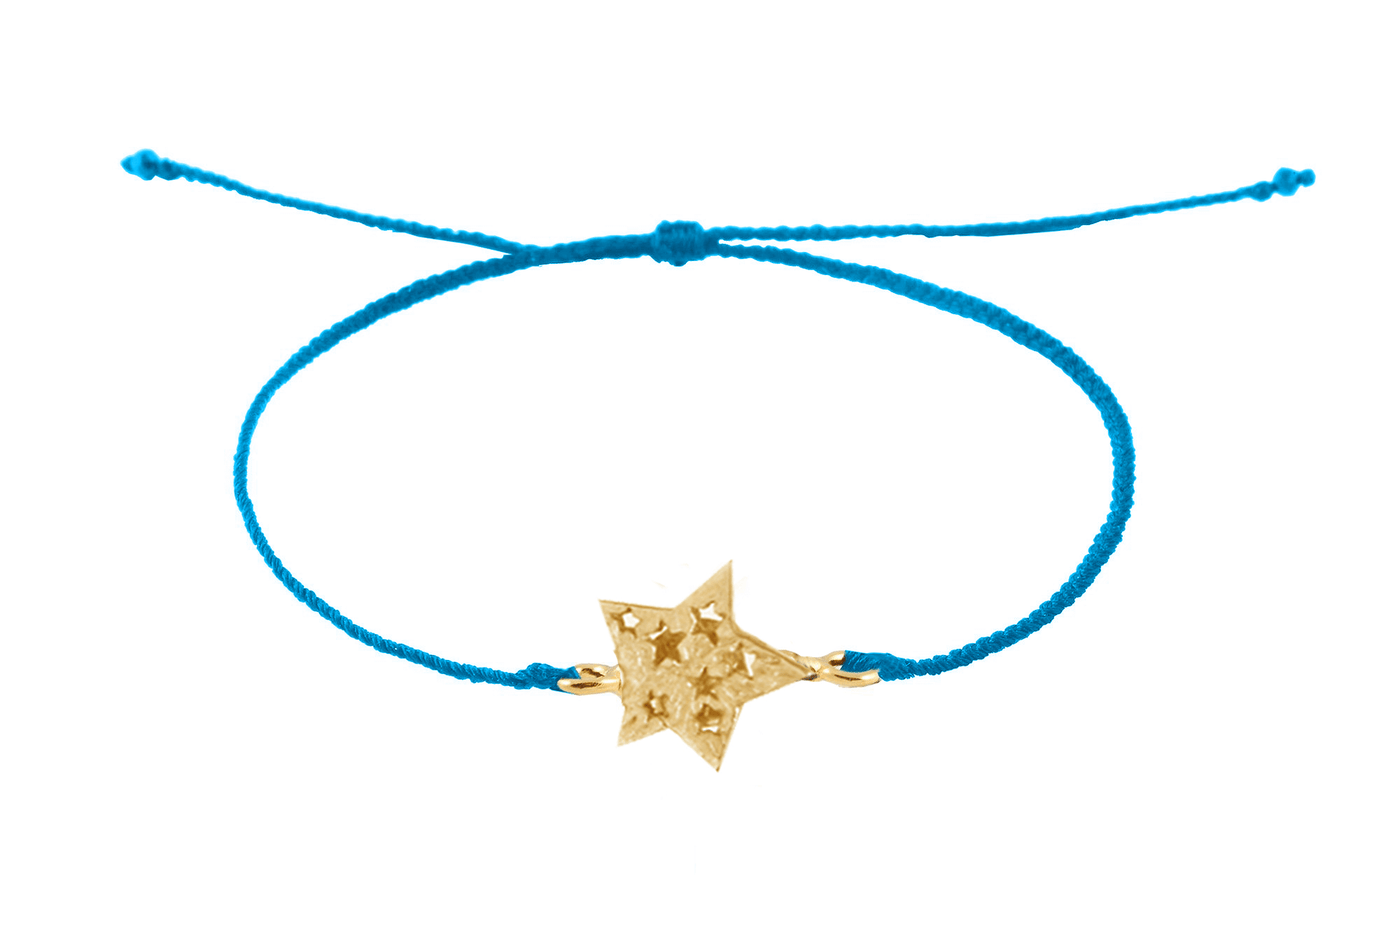 String bracelet with 5-pointed star amulet. Gold plated